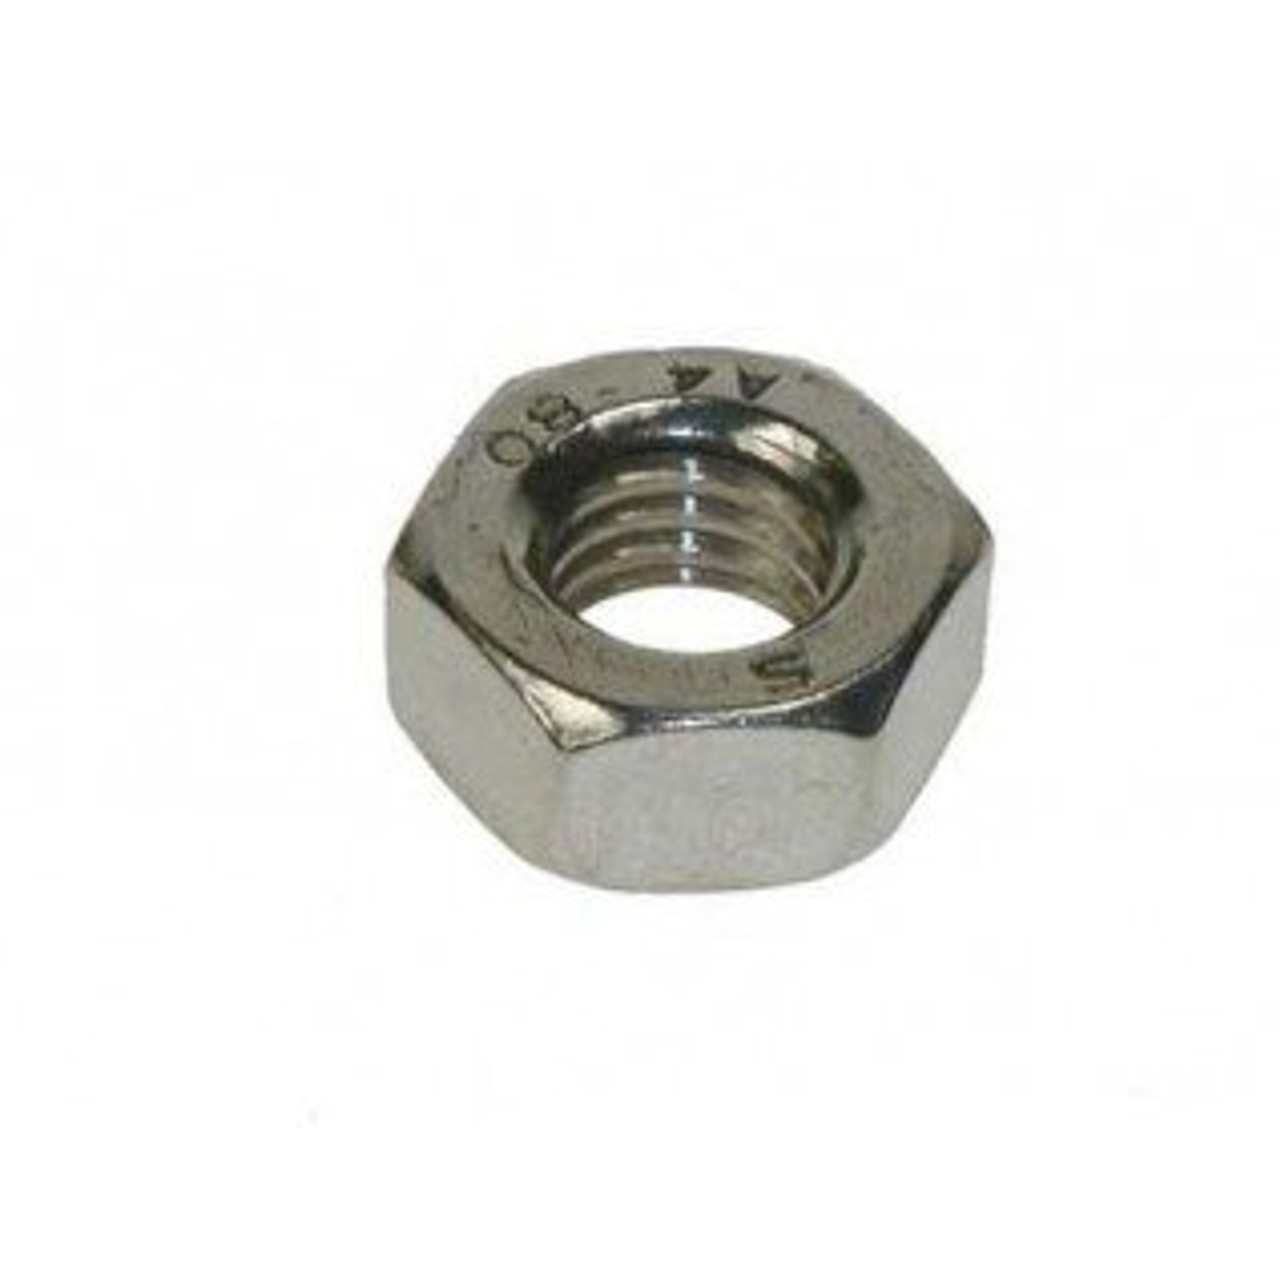 M3 Full Nut (50 Pack) 3mm A2 Stainless Steel Hex Hexagon Nuts